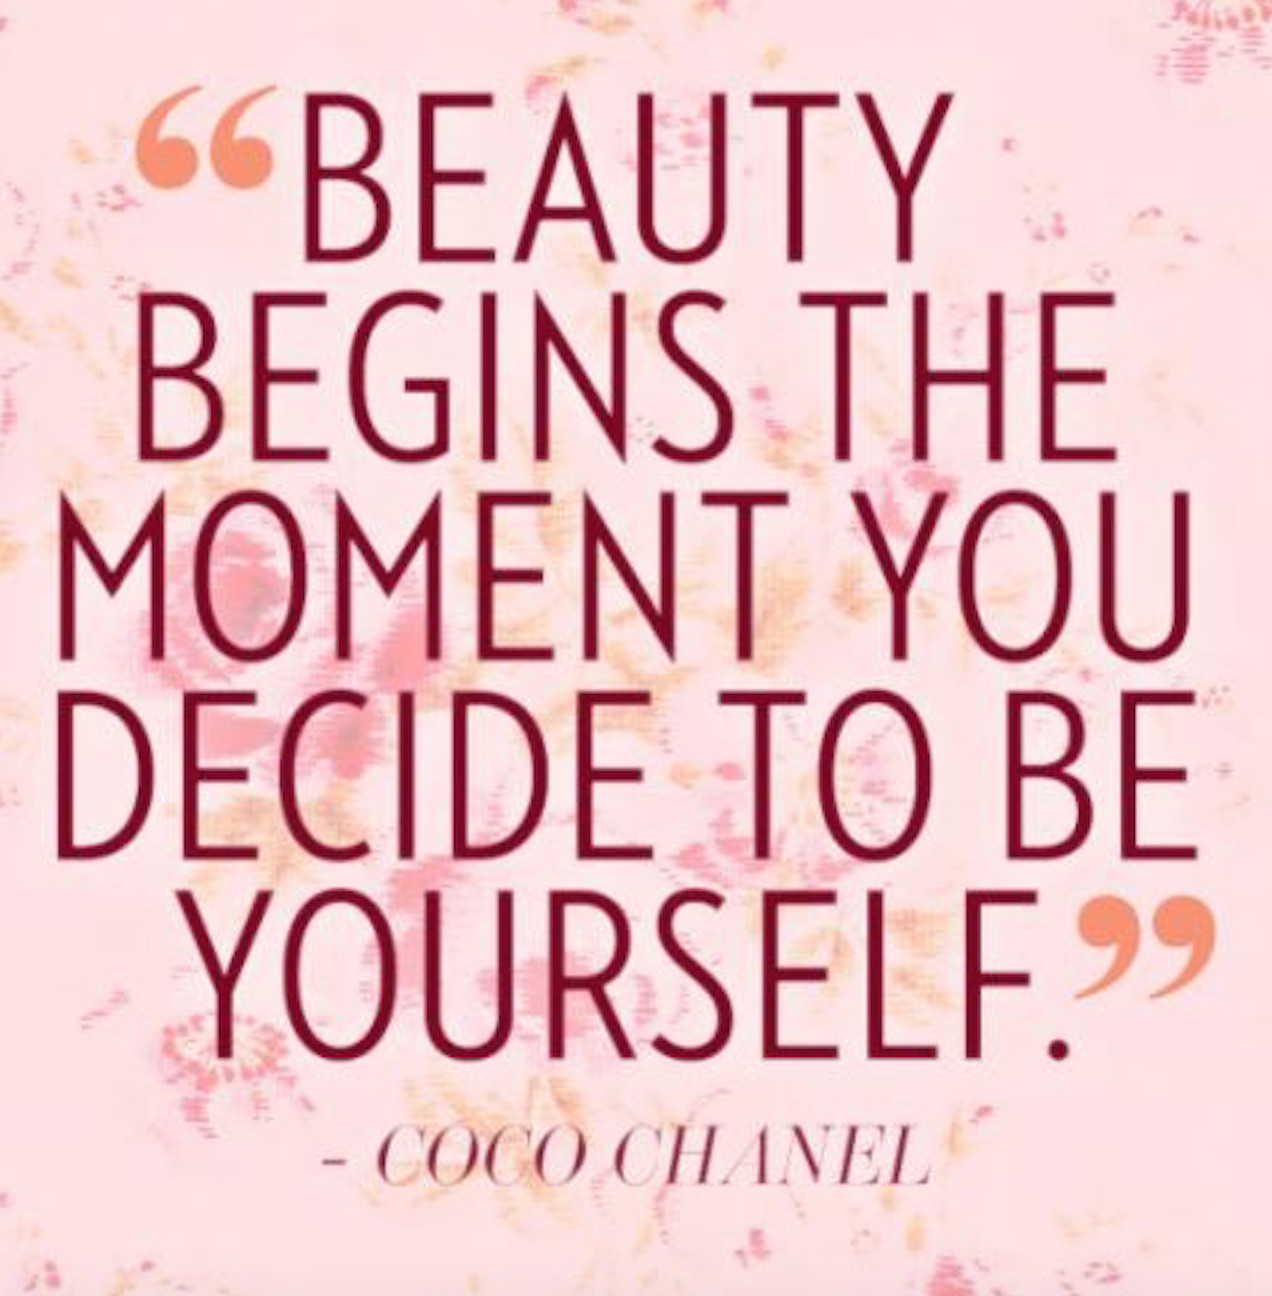 Inspirational Quote Women
 35 Motivational Quotes for Women to Start the New Year